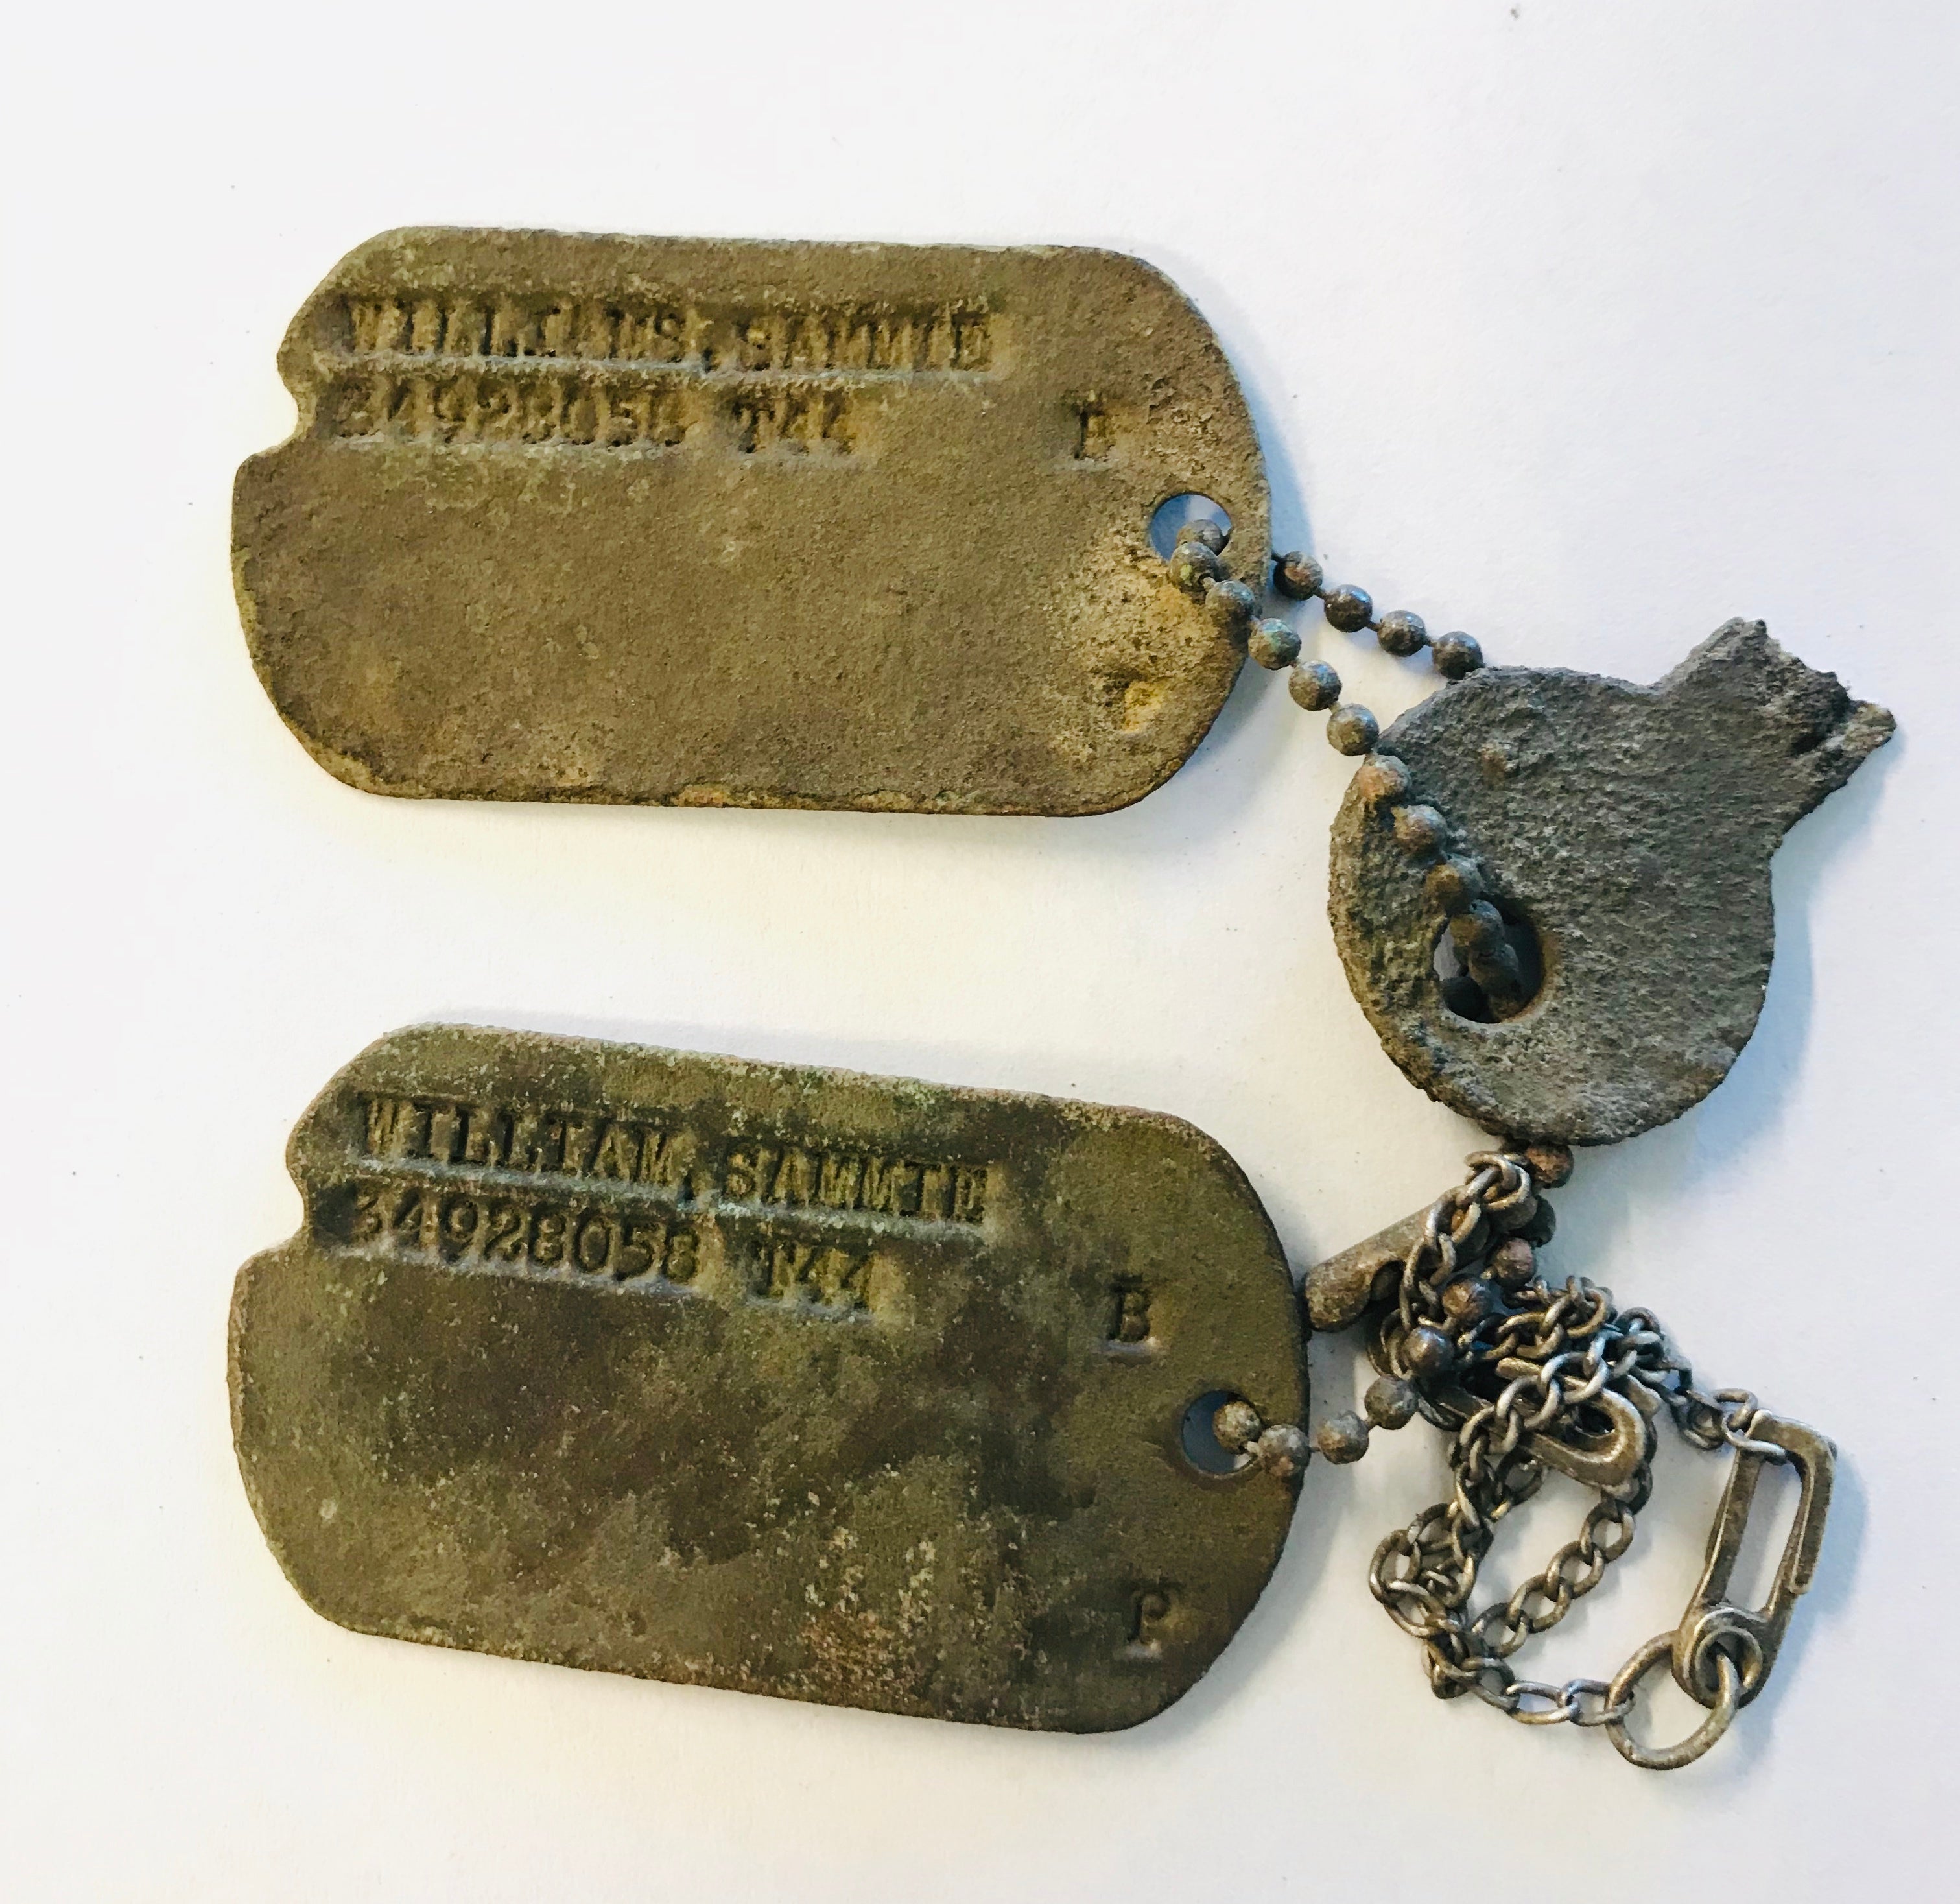 Personalized Military Dog Tags with Silencers; Custom Authentic Military  Dog Tags.